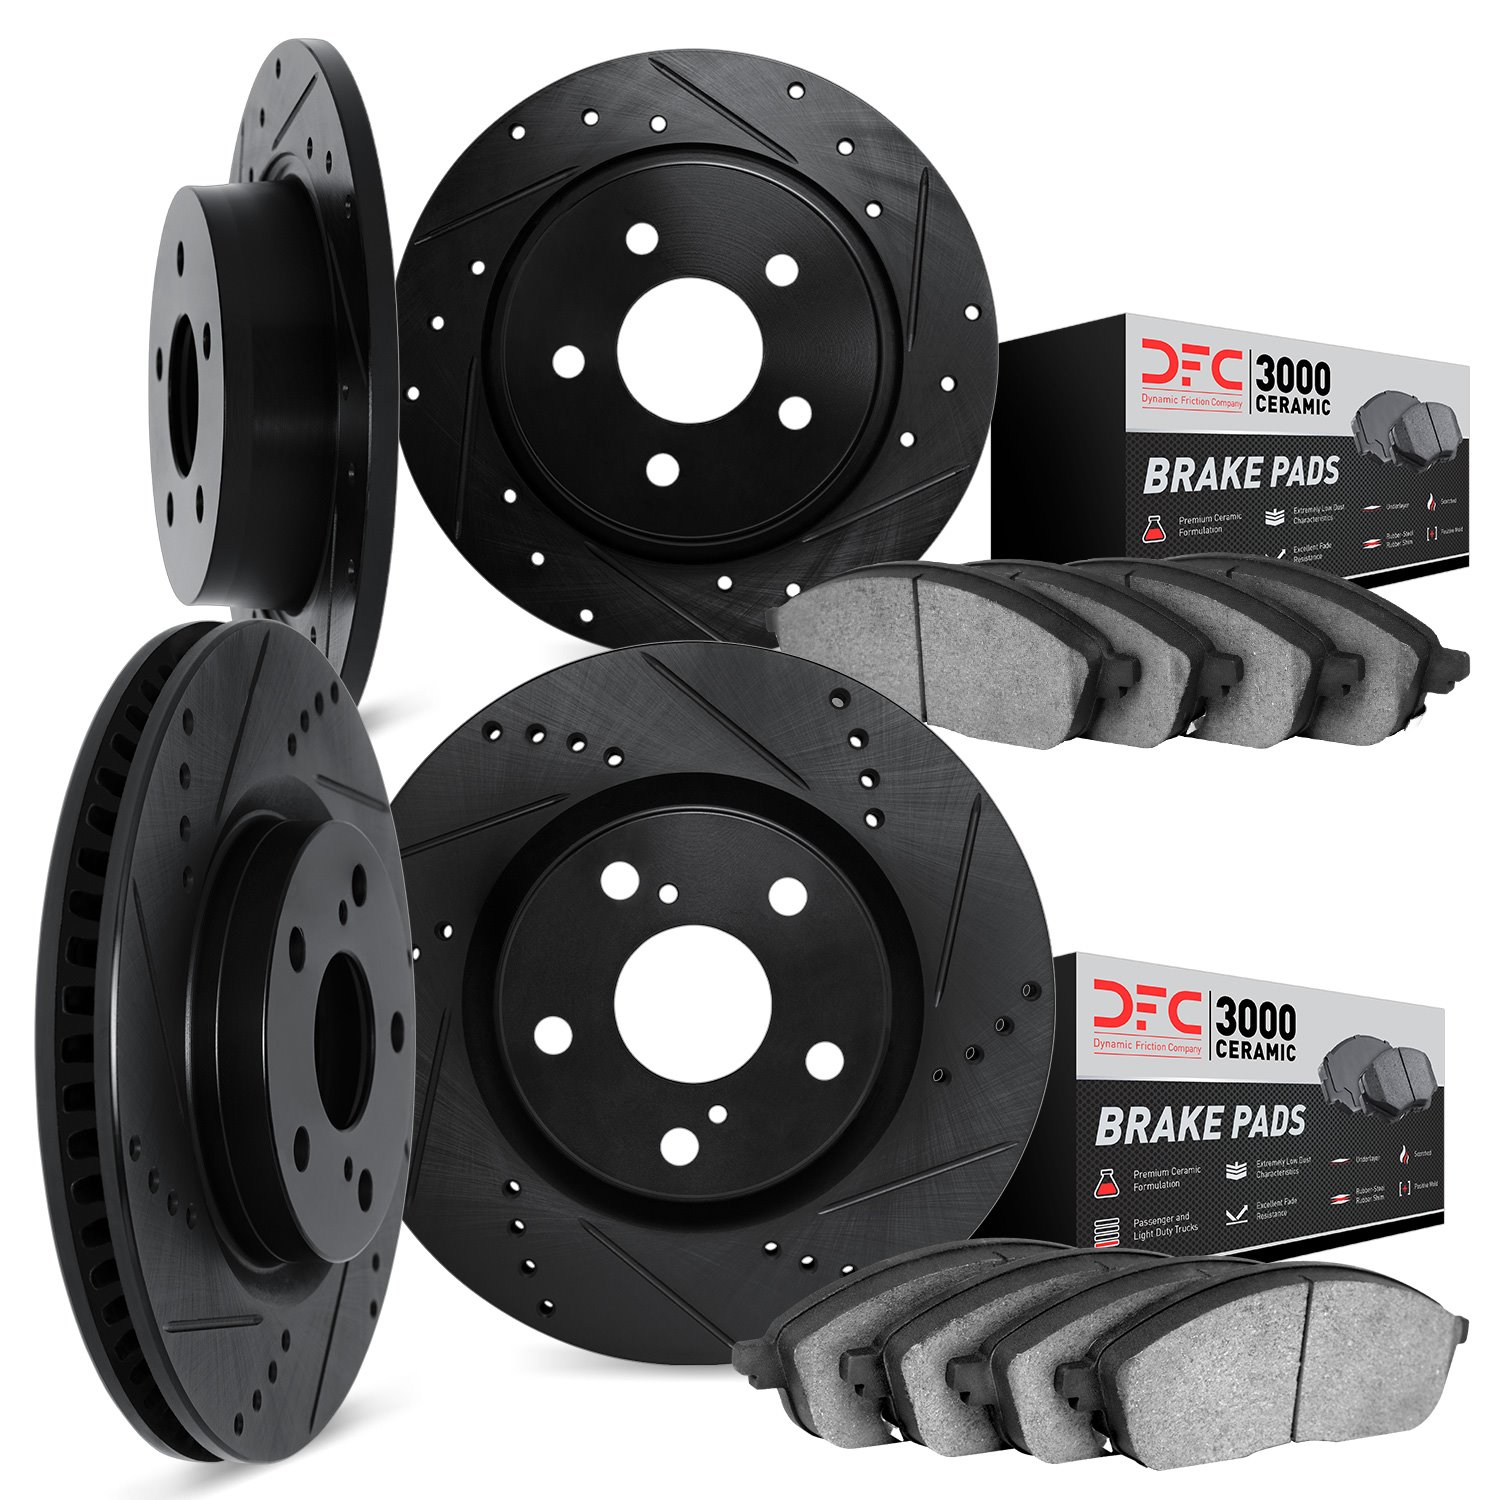 8304-63093 Drilled/Slotted Brake Rotors with 3000-Series Ceramic Brake Pads Kit [Black], 2001-2015 Mercedes-Benz, Position: Fron